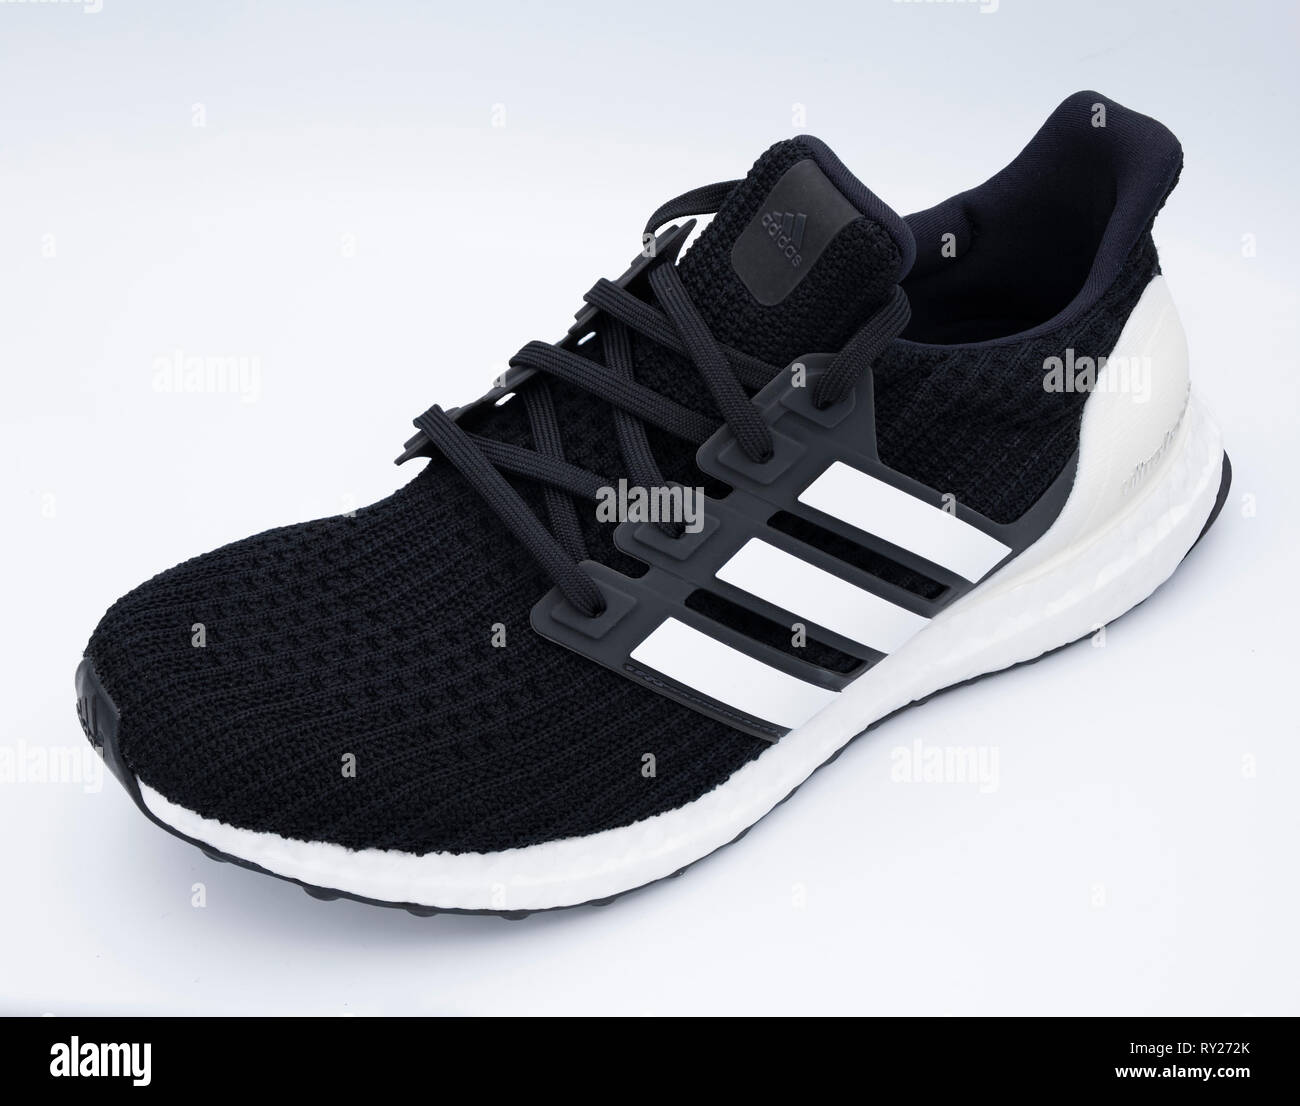 Adidas Ultraboost sneaker cut out isolated on white background Stock Photo